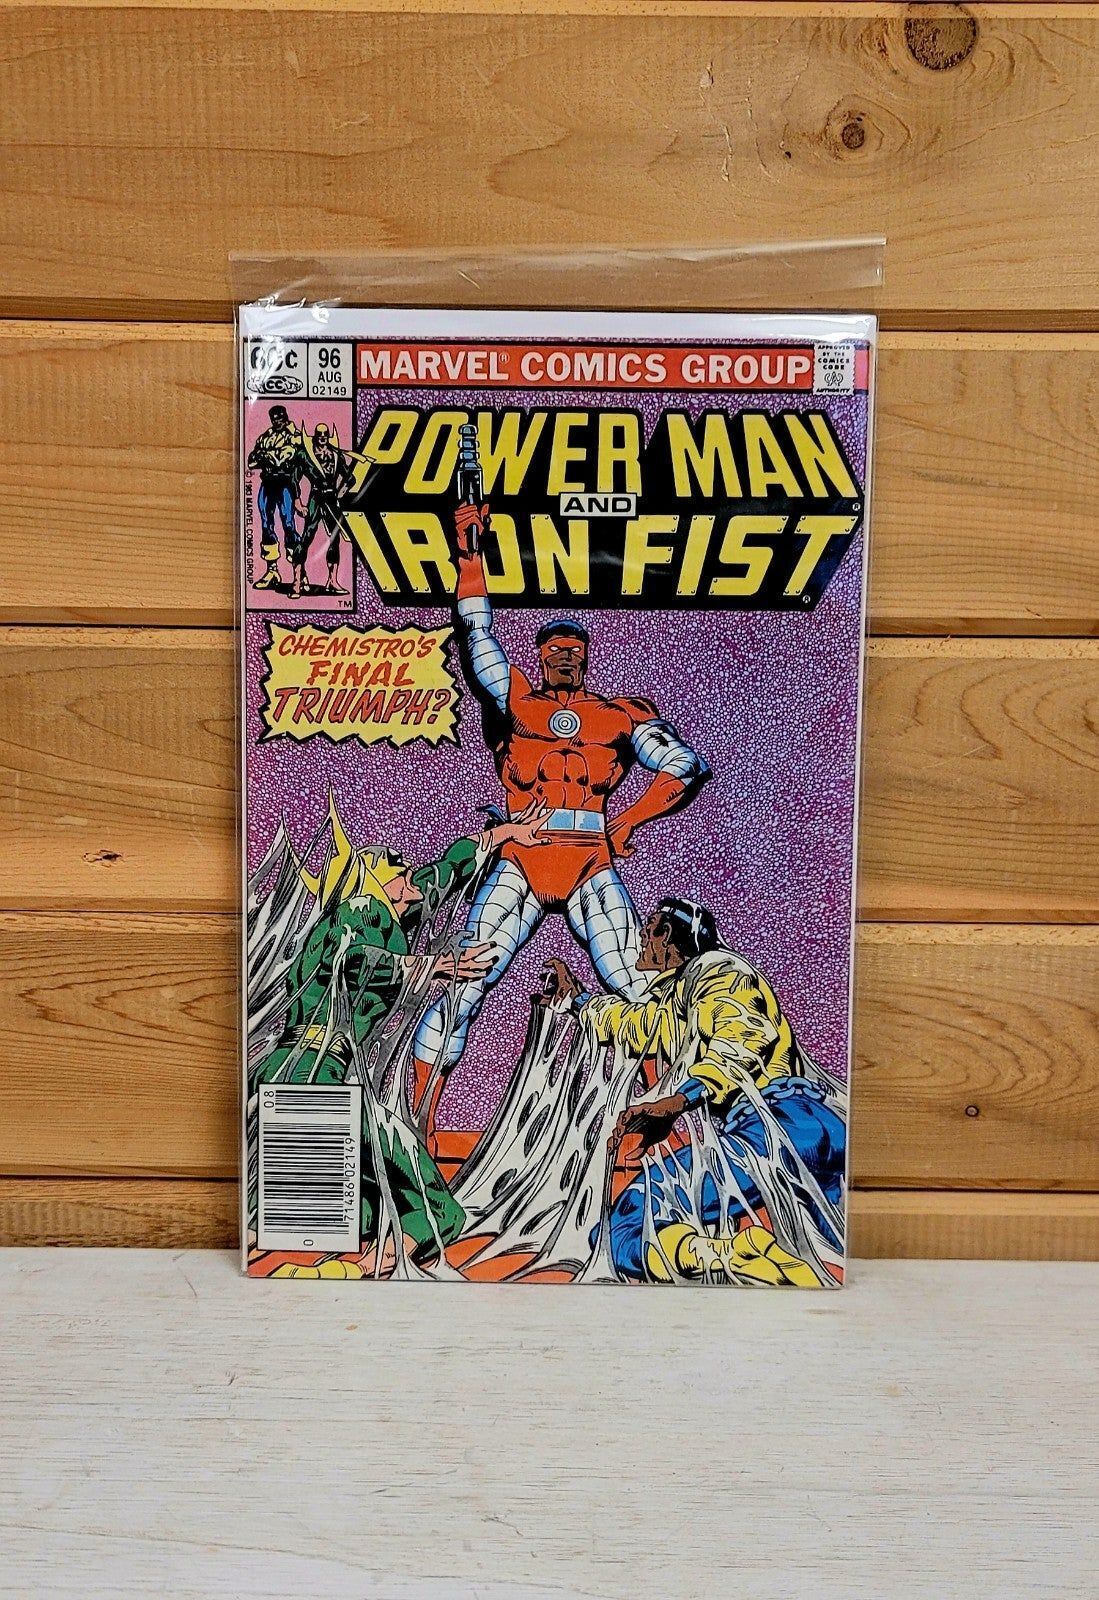 Primary image for Marvel Comics Power Man and Iron Fist #96 Vintage 1983 Chemistro